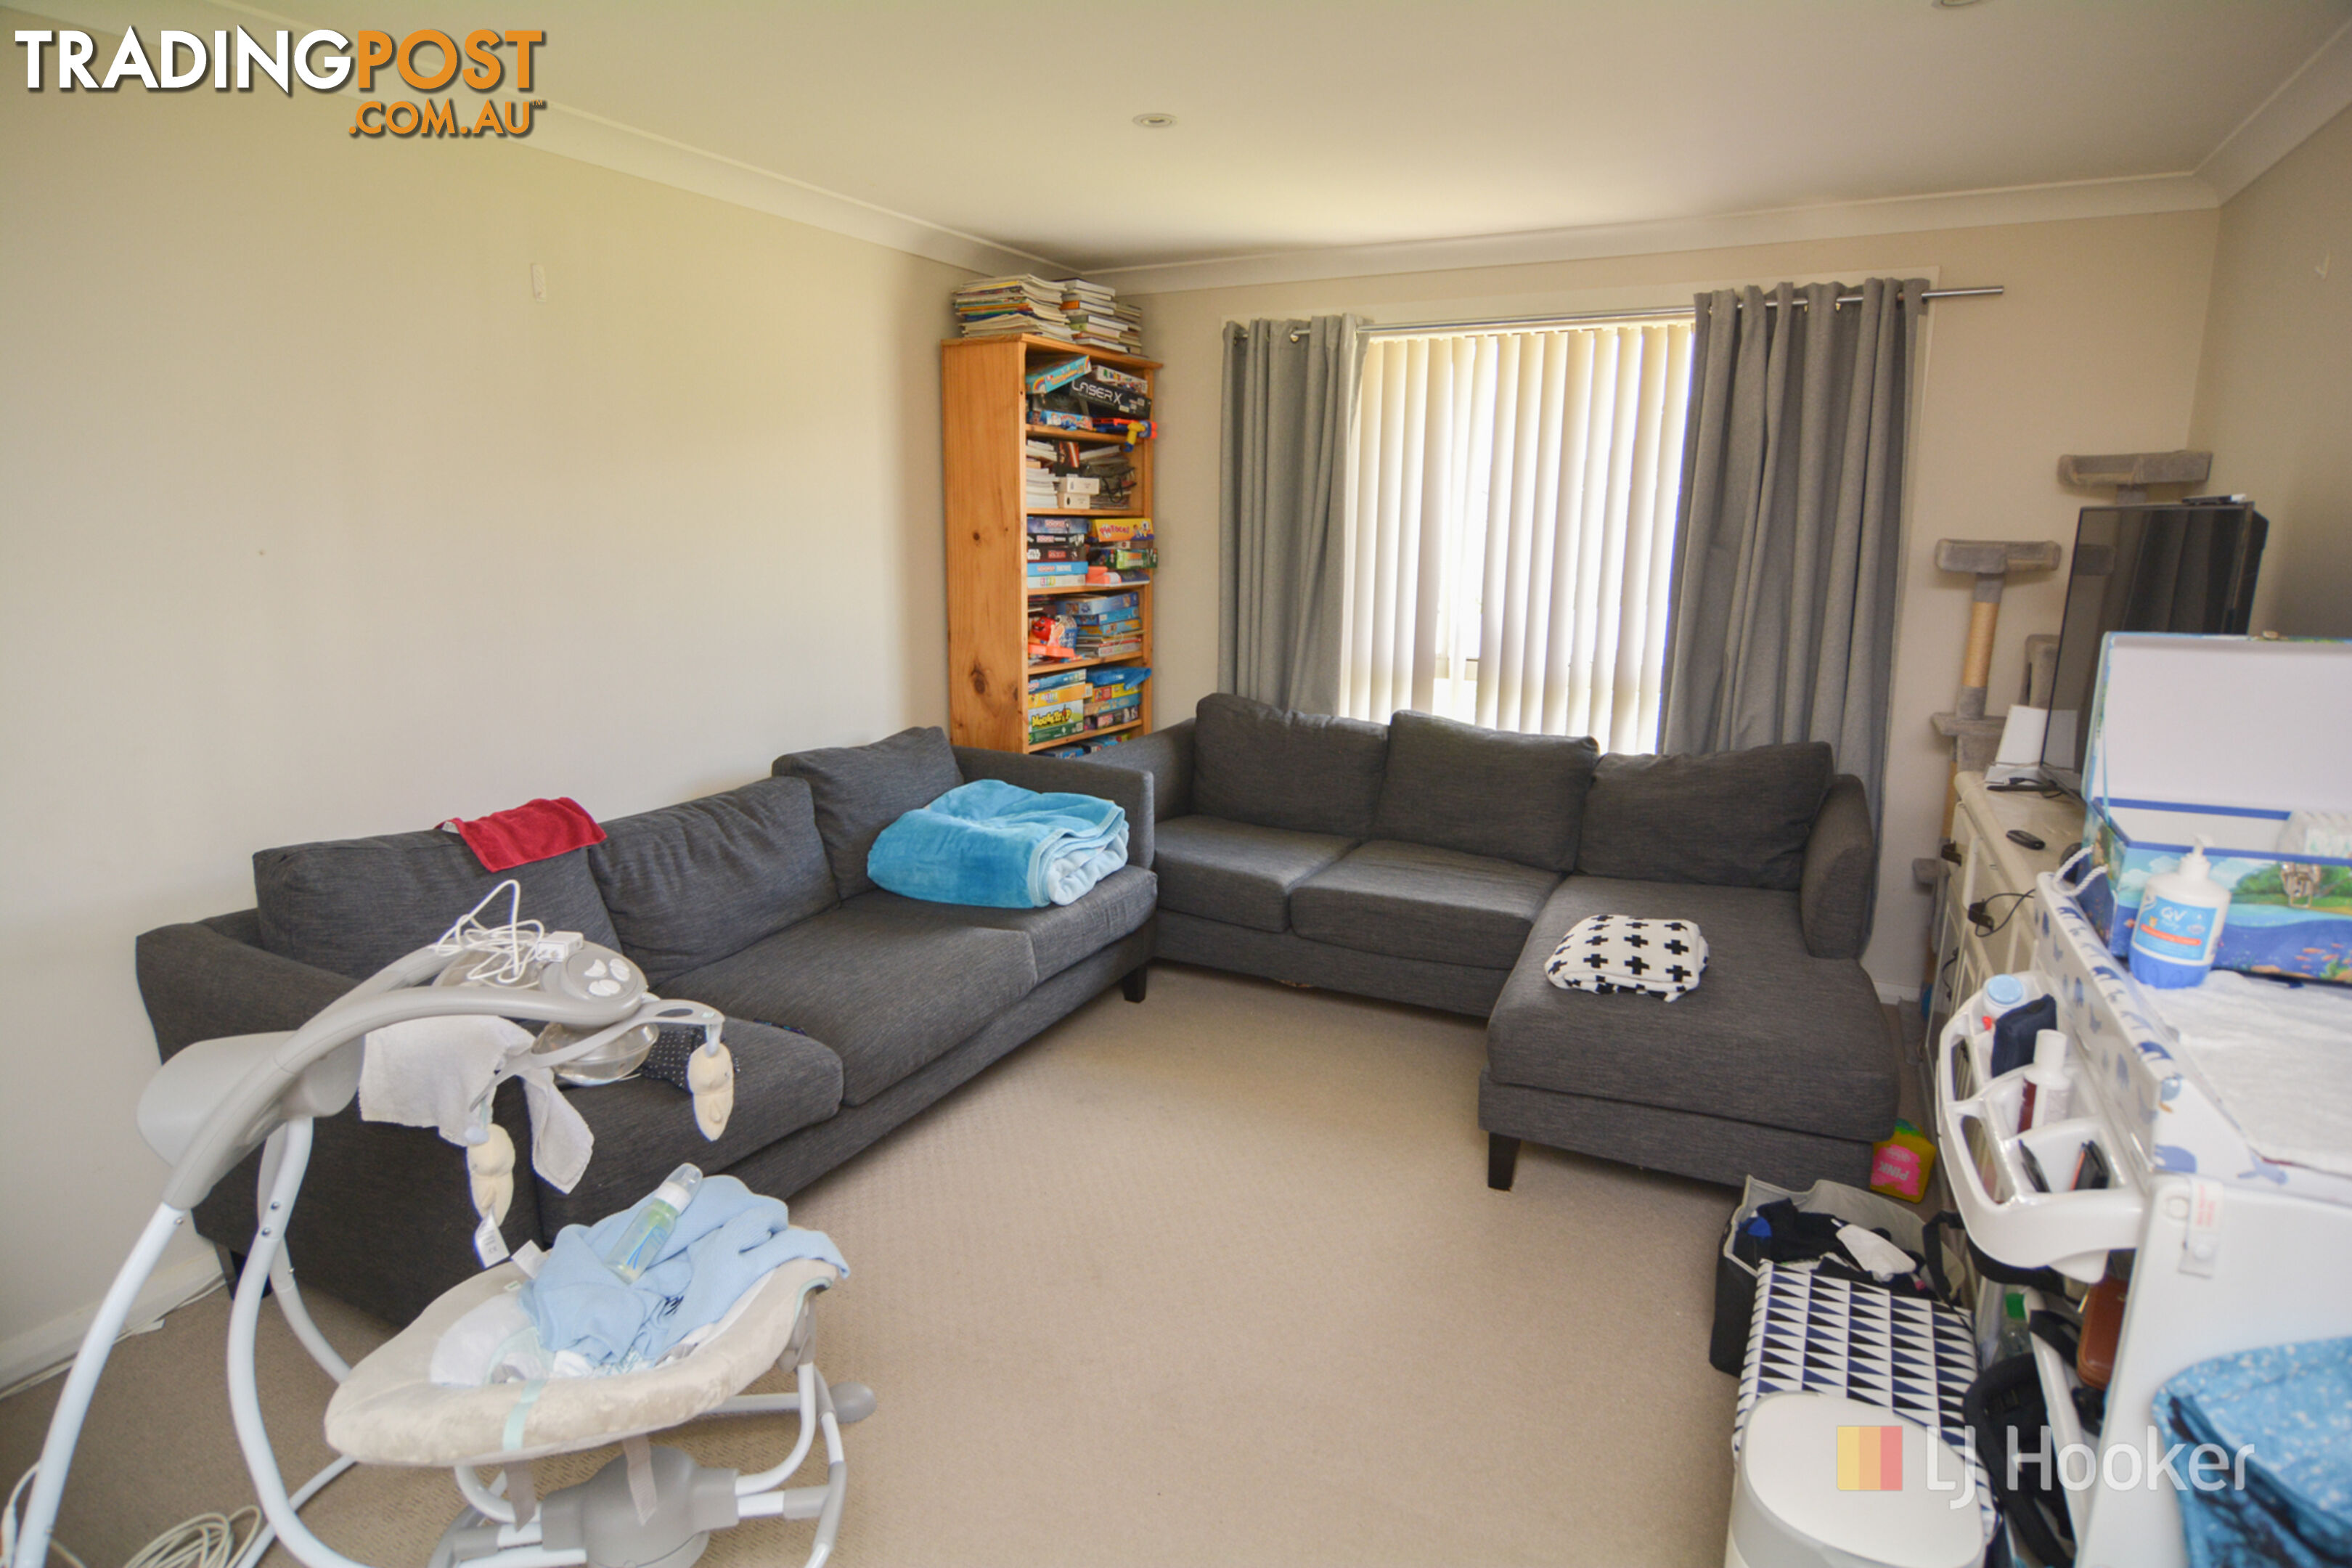 1 & 1a Pirena Place LITHGOW NSW 2790